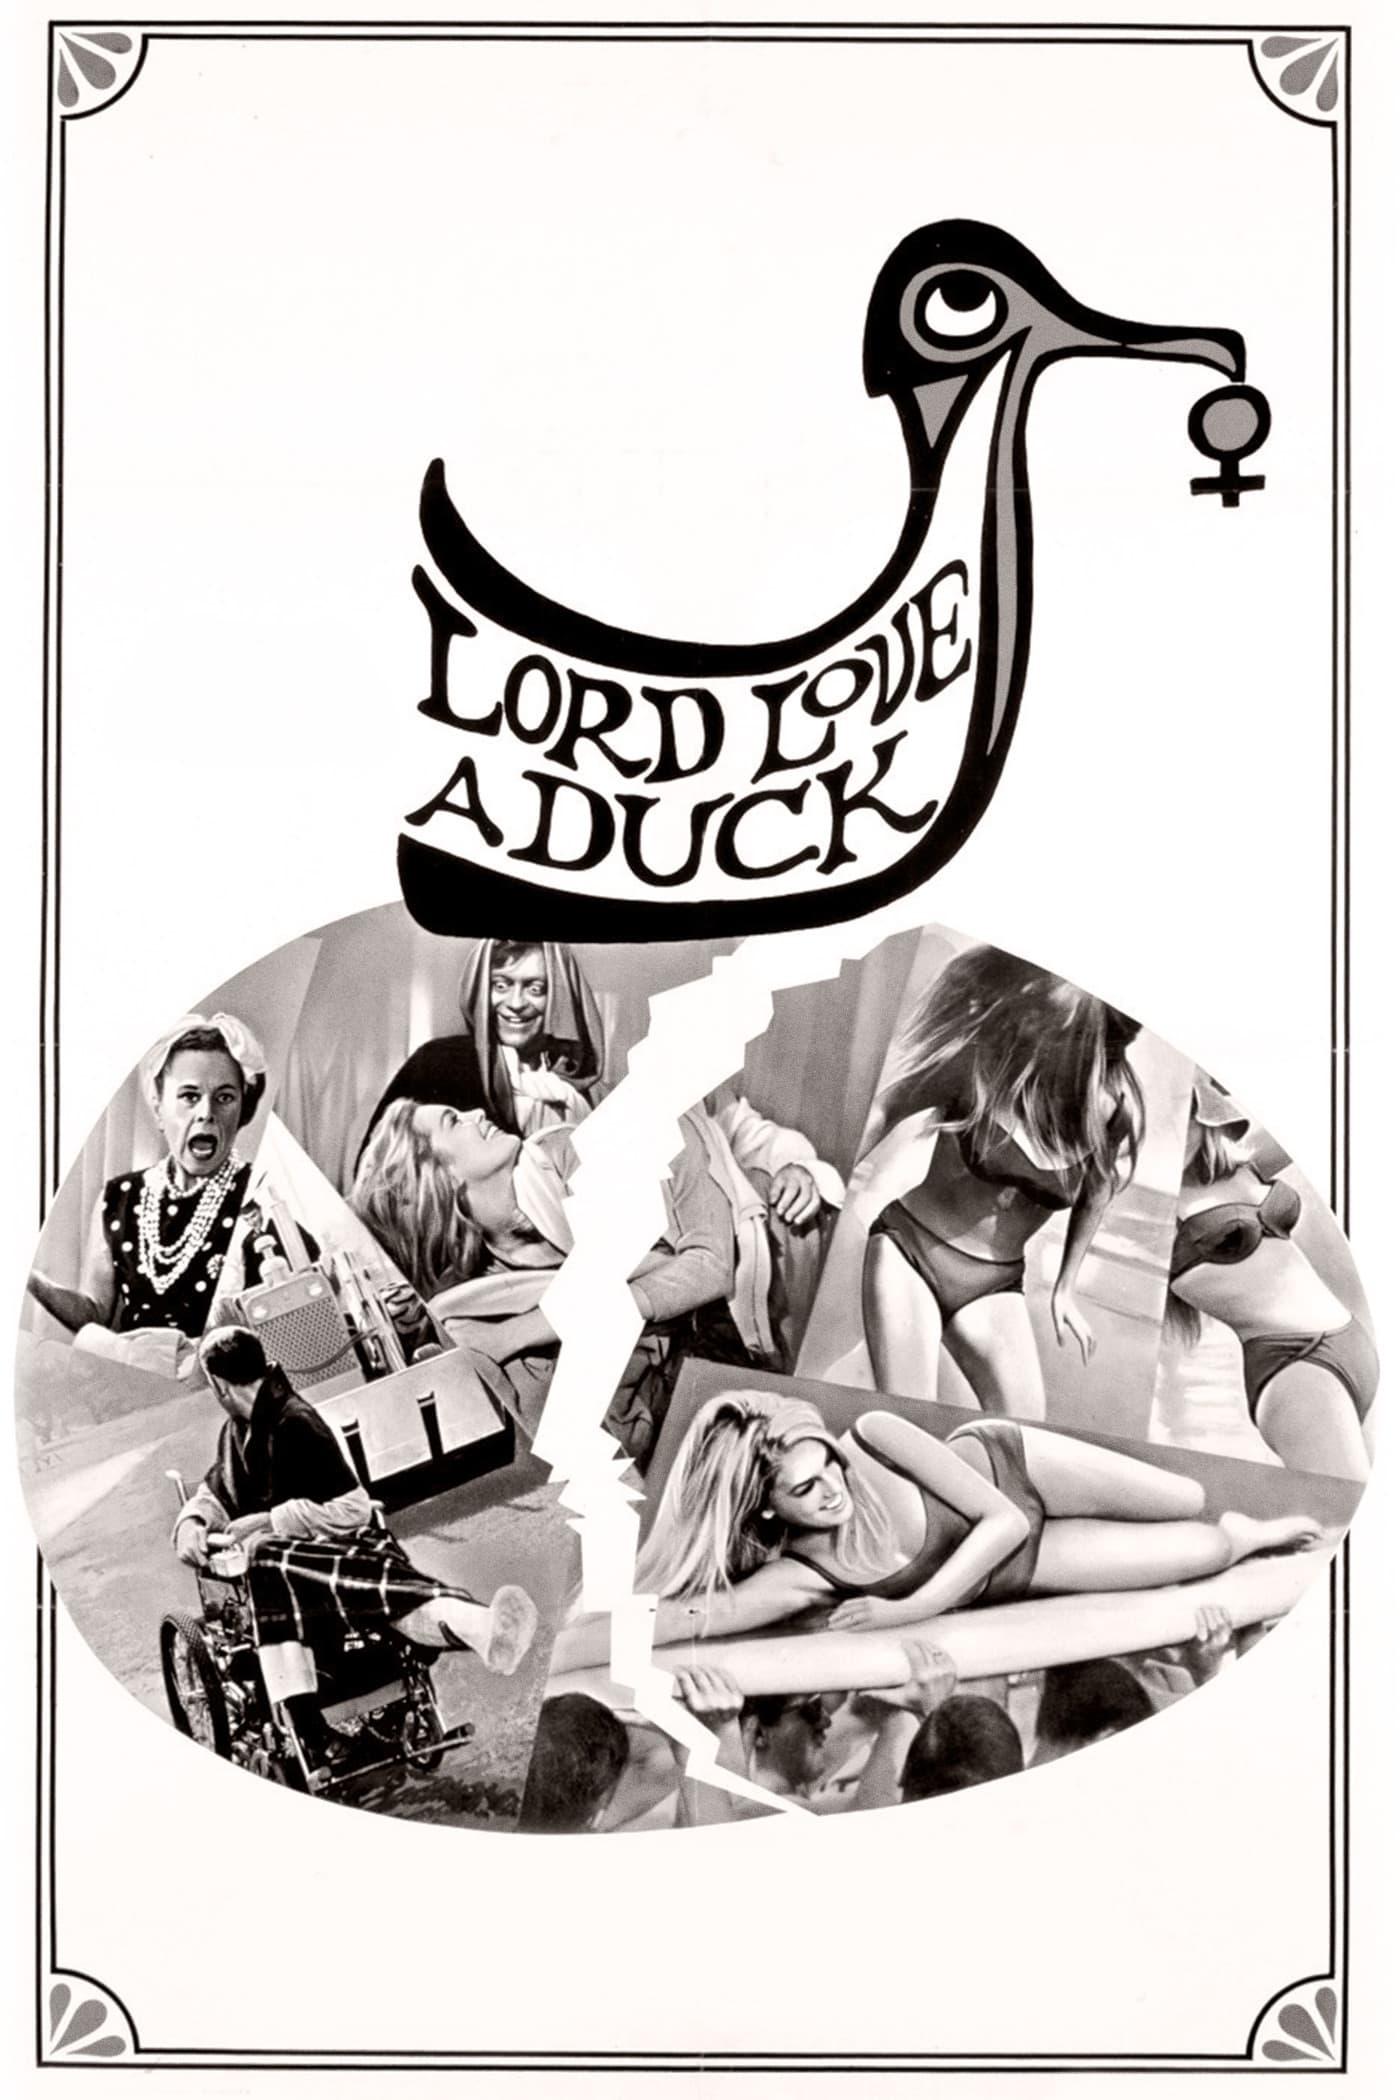 Lord Love a Duck poster